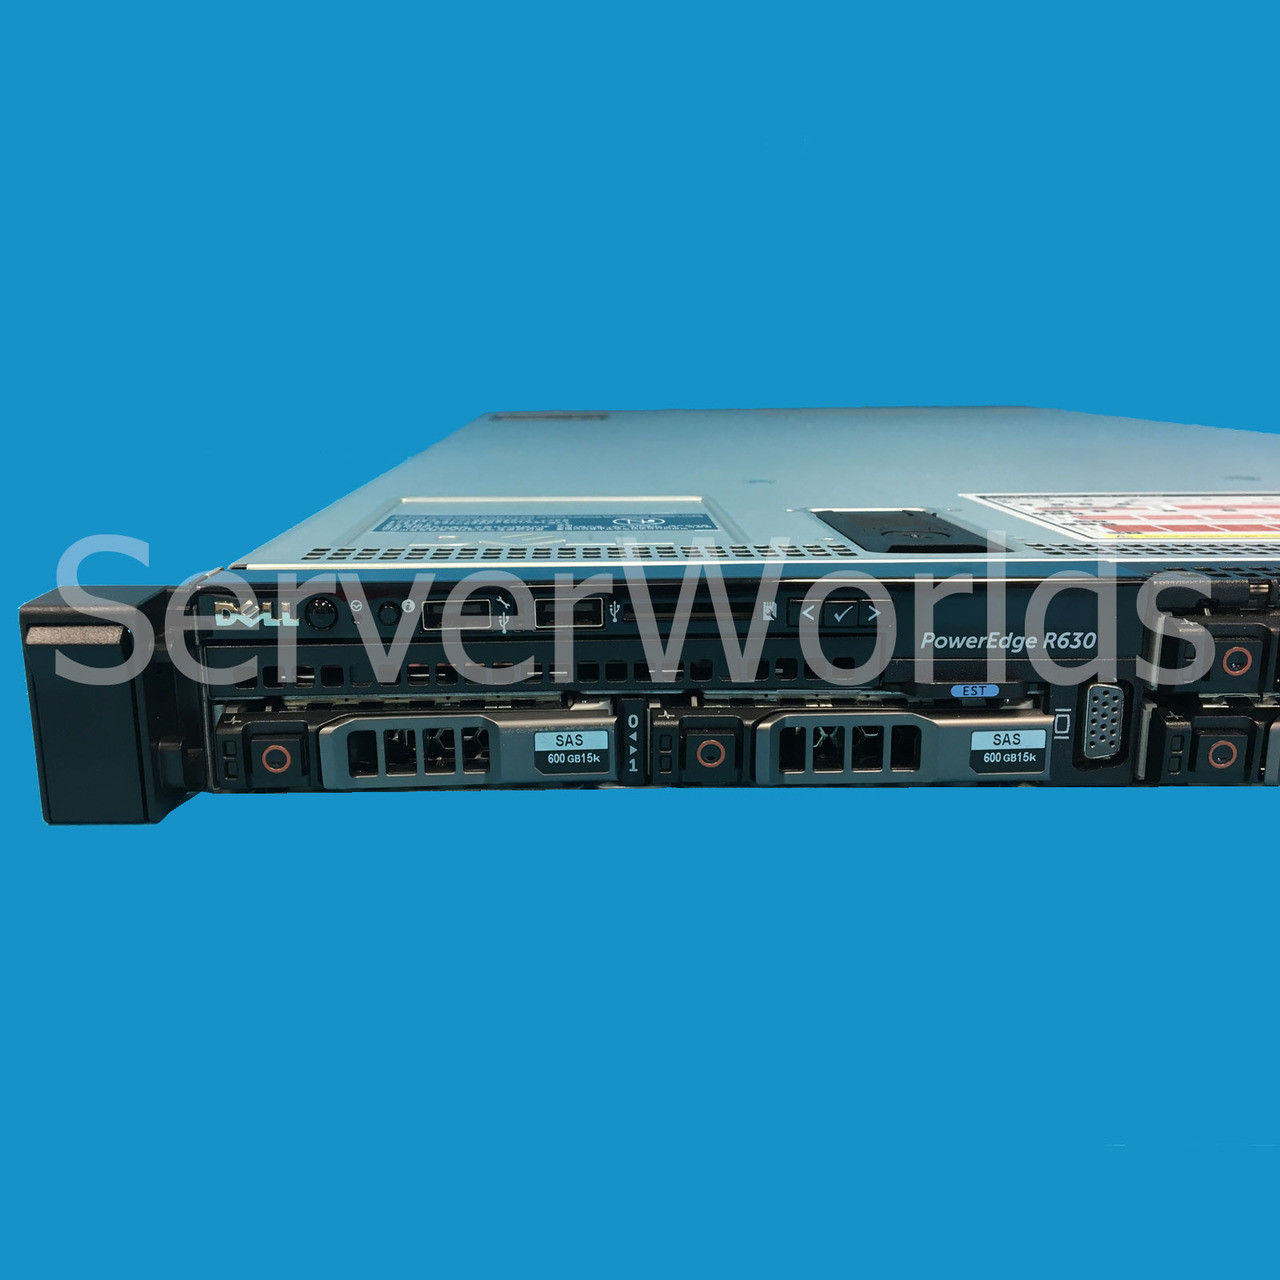 Refurbished Poweredge R630, Configured to Order, 8HDD Product Label